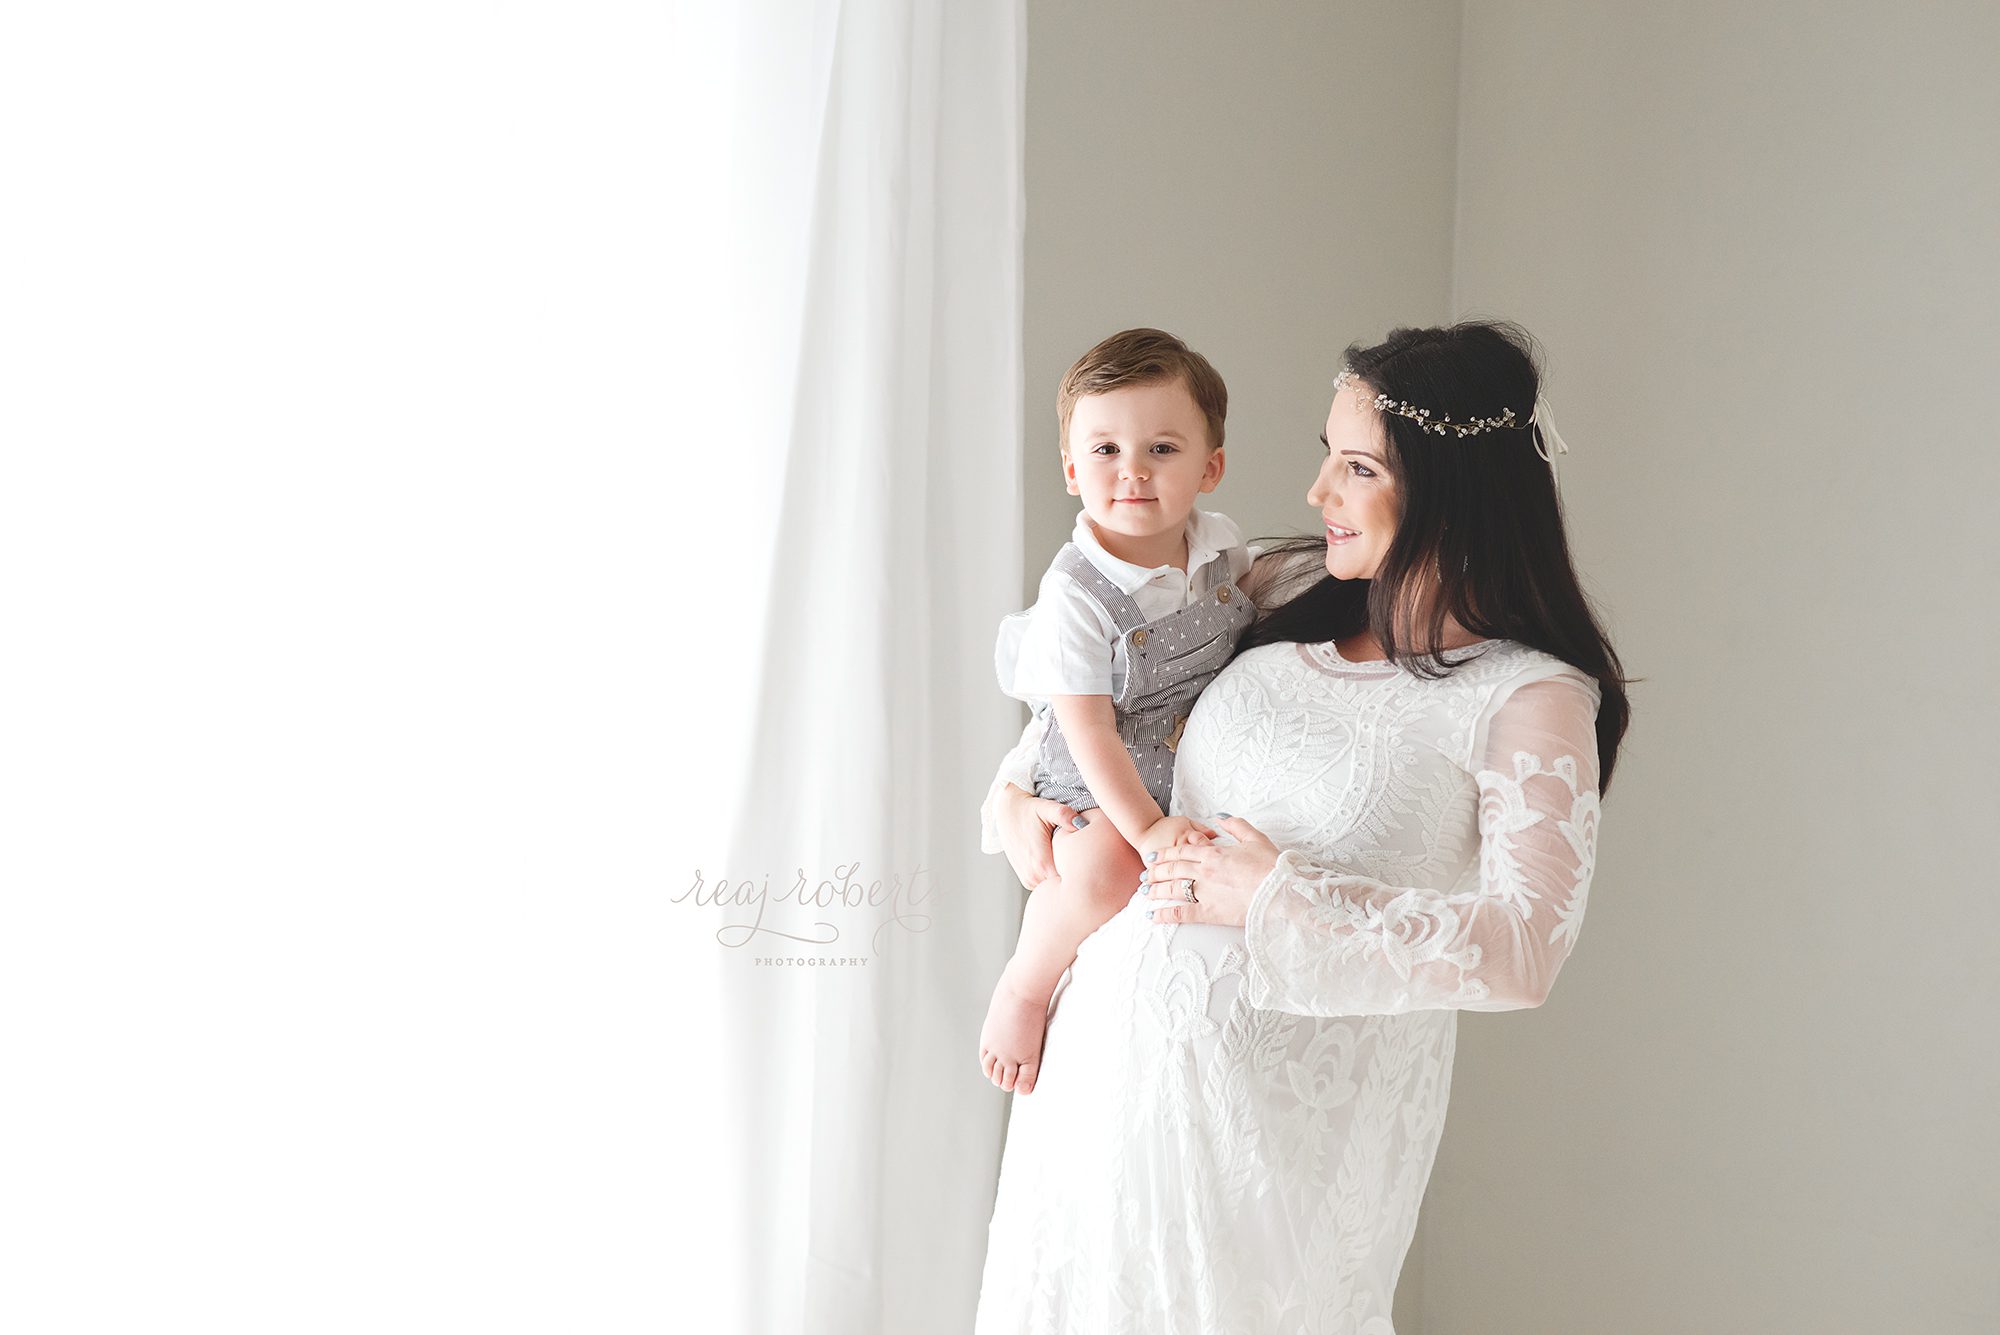 Pregnancy Photos with Toddler | Reaj Roberts Photography